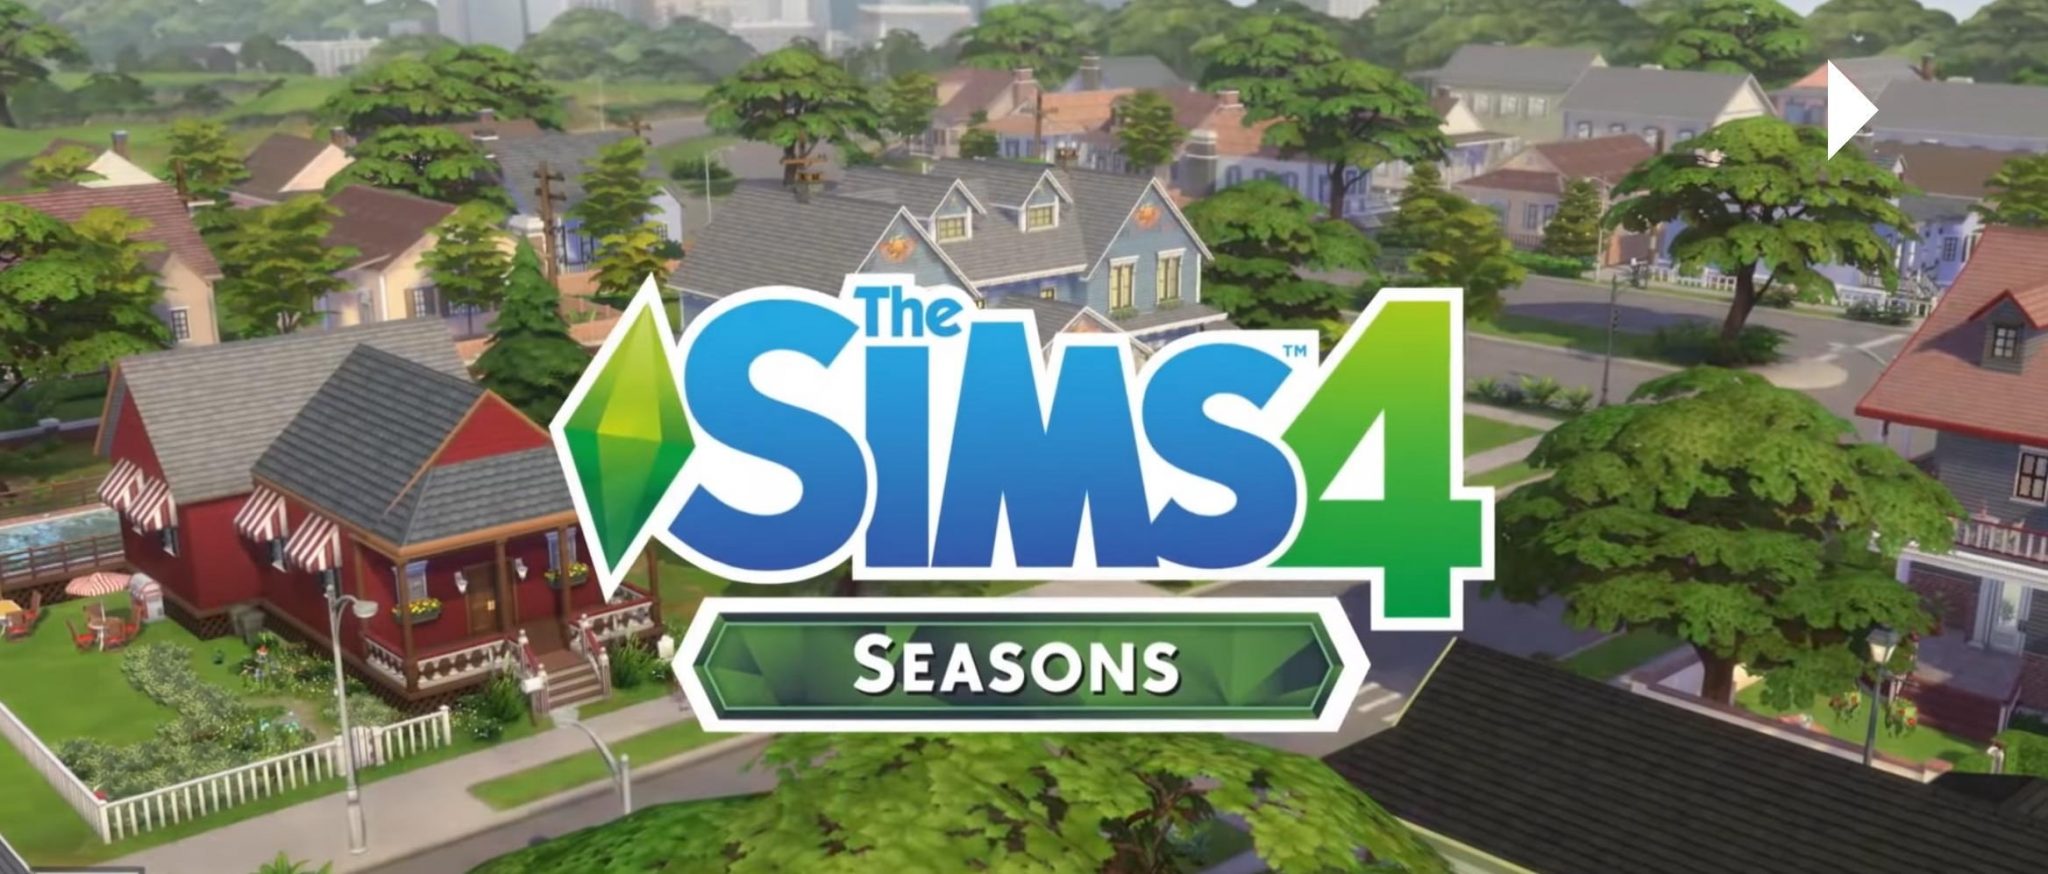 free sims 4 game downloads for pc full version